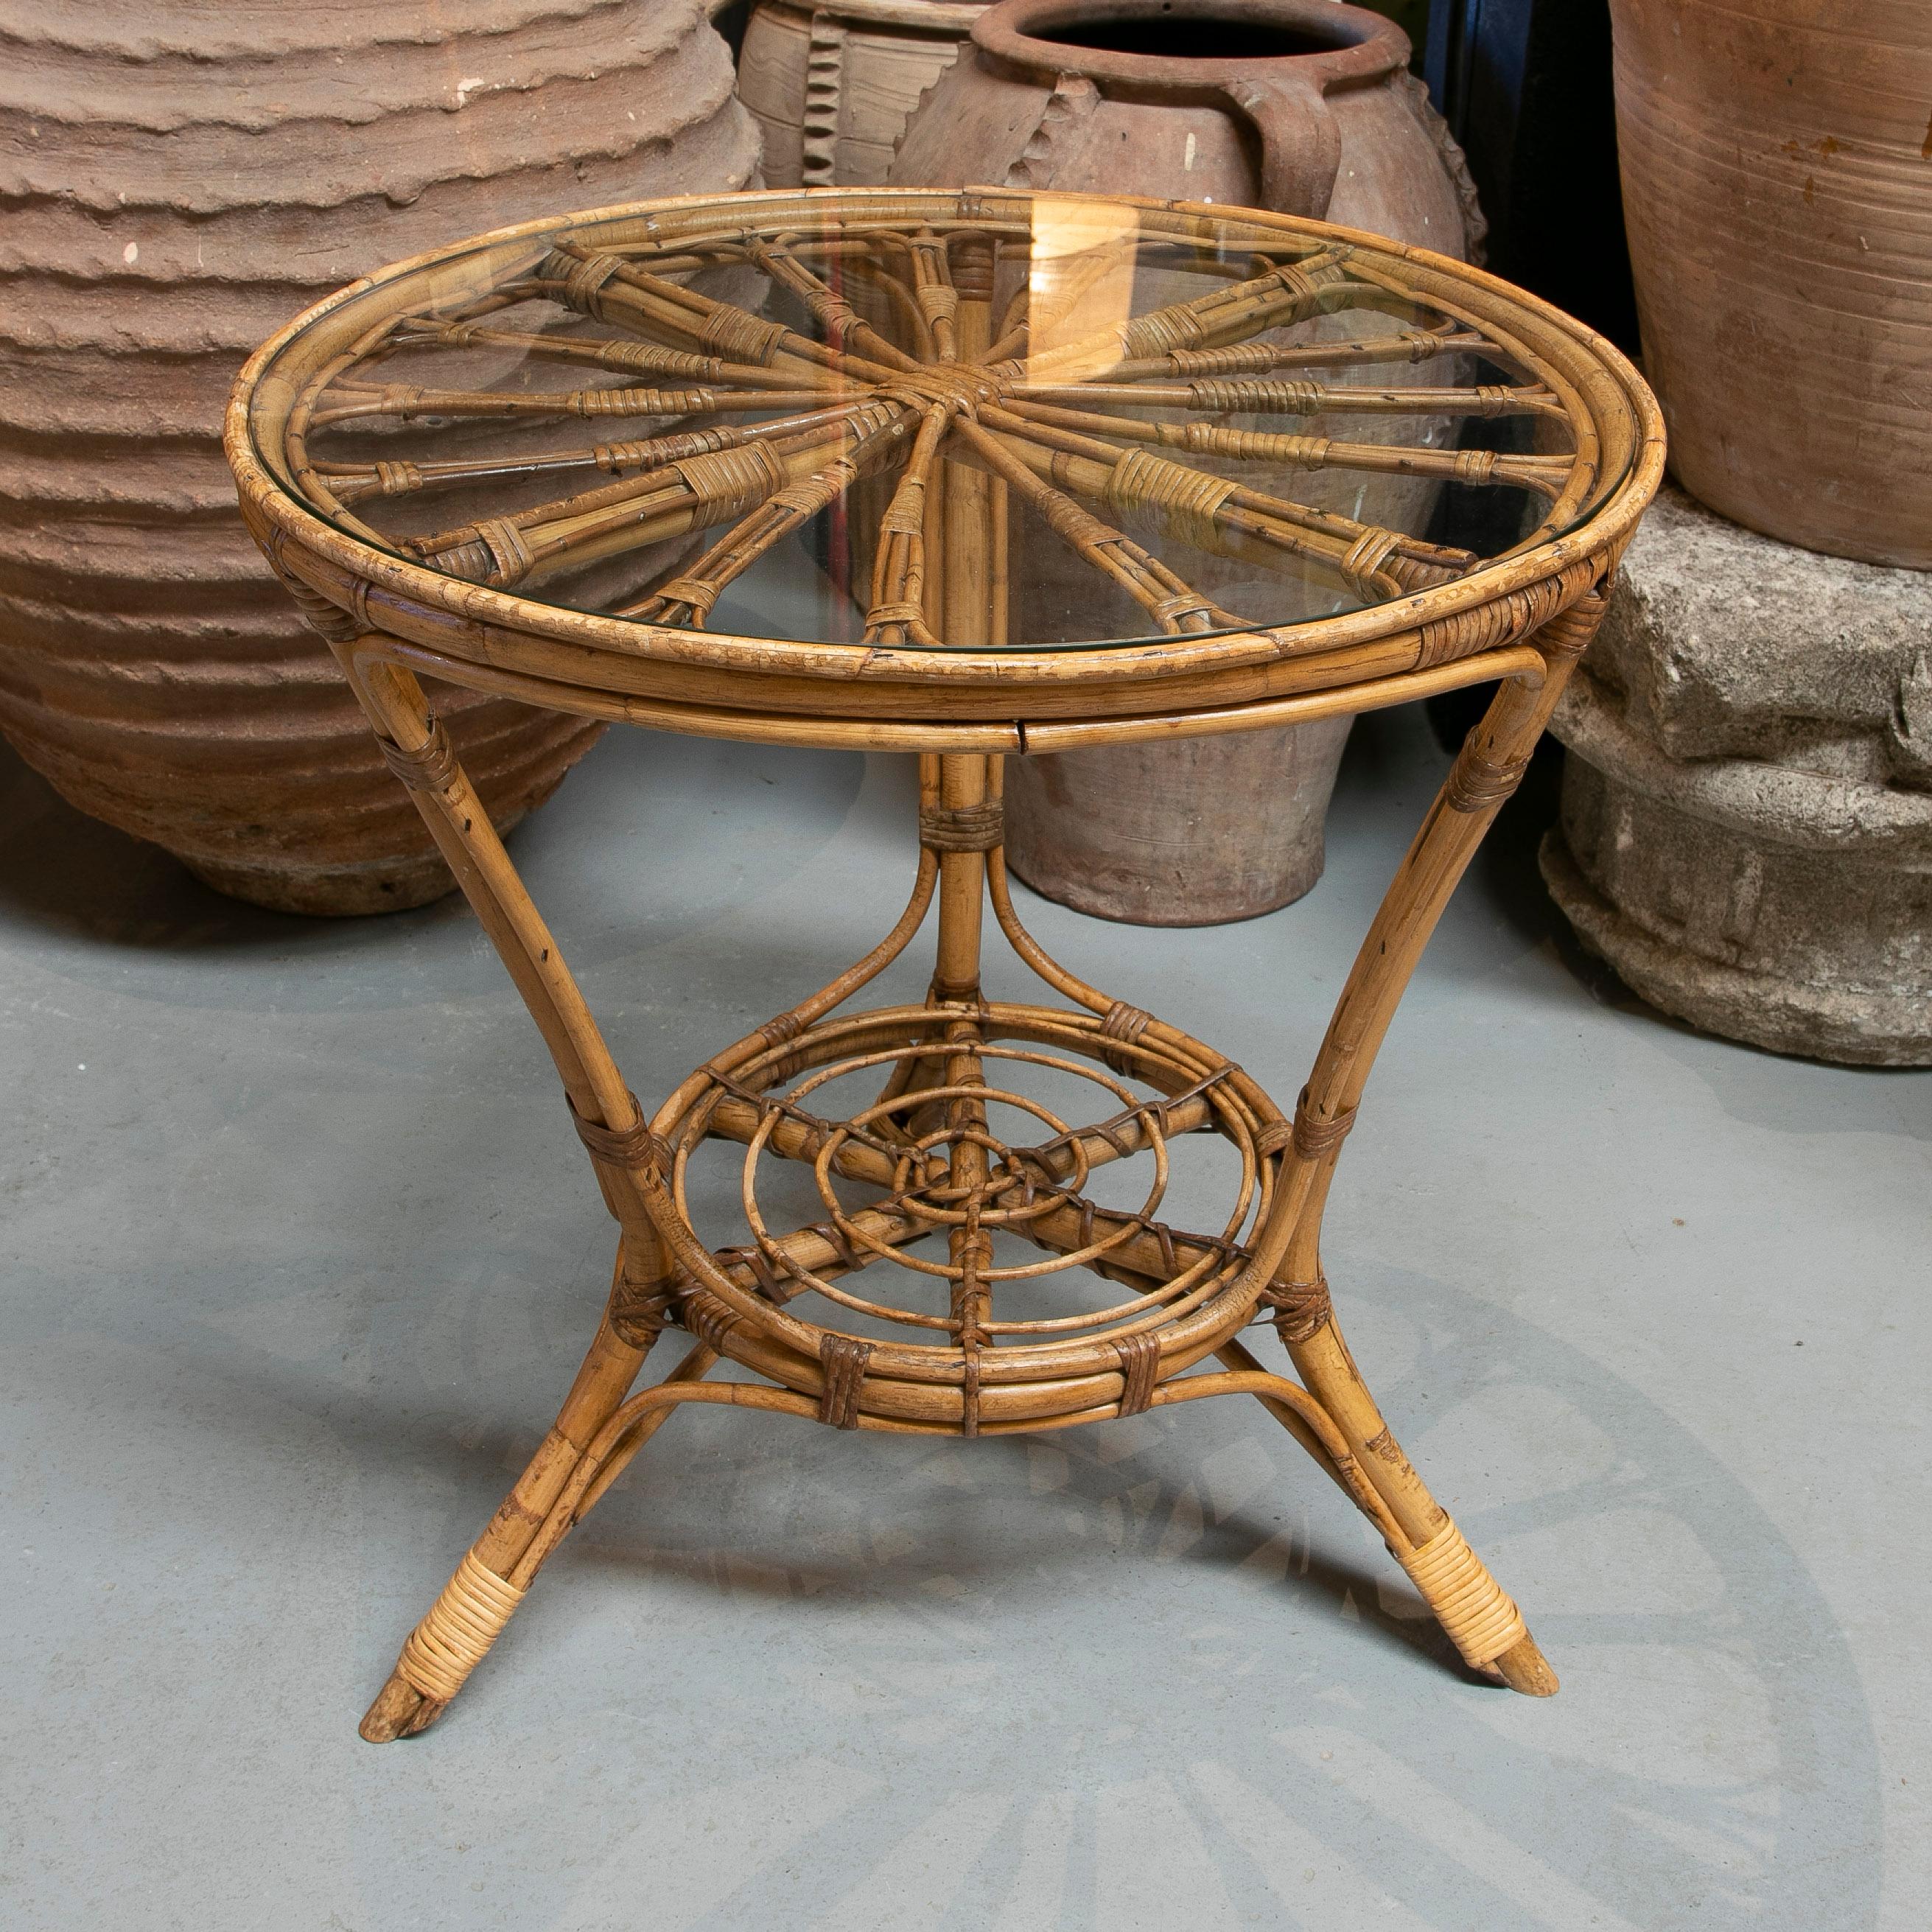 Vintage 1970s Spanish round bamboo and woven wicker table.